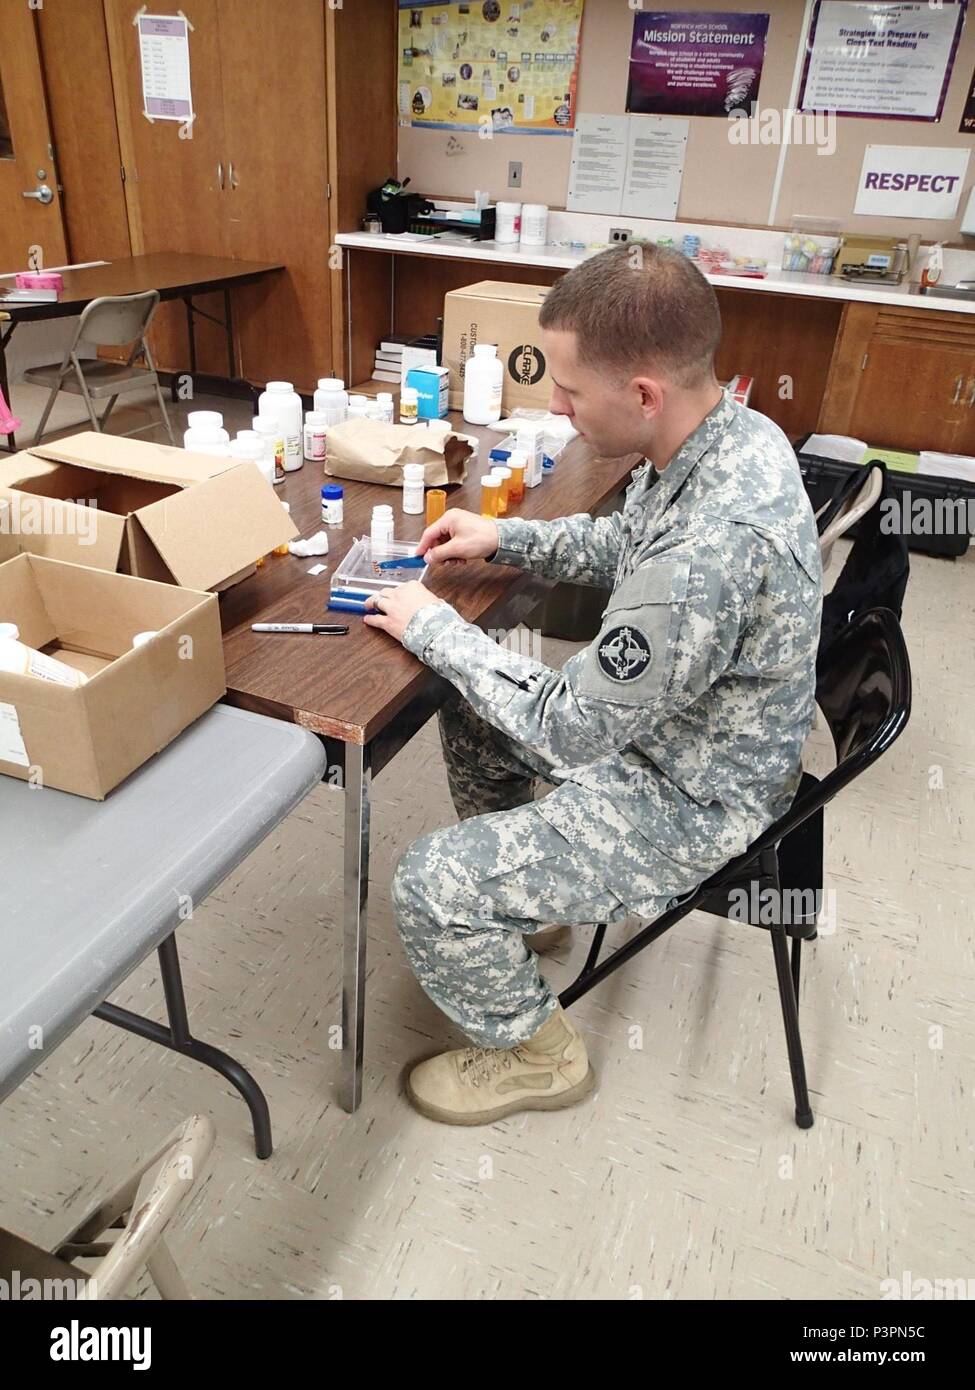 Pfc. Michael Fiedor, a pharmacy technician from Company A, 48th Combat Support Hospital, Fort Story, Va., counts out medication for a patient during Greater Chenango Cares, July 19, 2016.  Greater Chenango Cares is one of the Innovative Readiness Training events which provides real-world training in a joint civil-military environment while delivering world class medical care to the people of Chenango County, N.Y., from July 15-24. Stock Photo